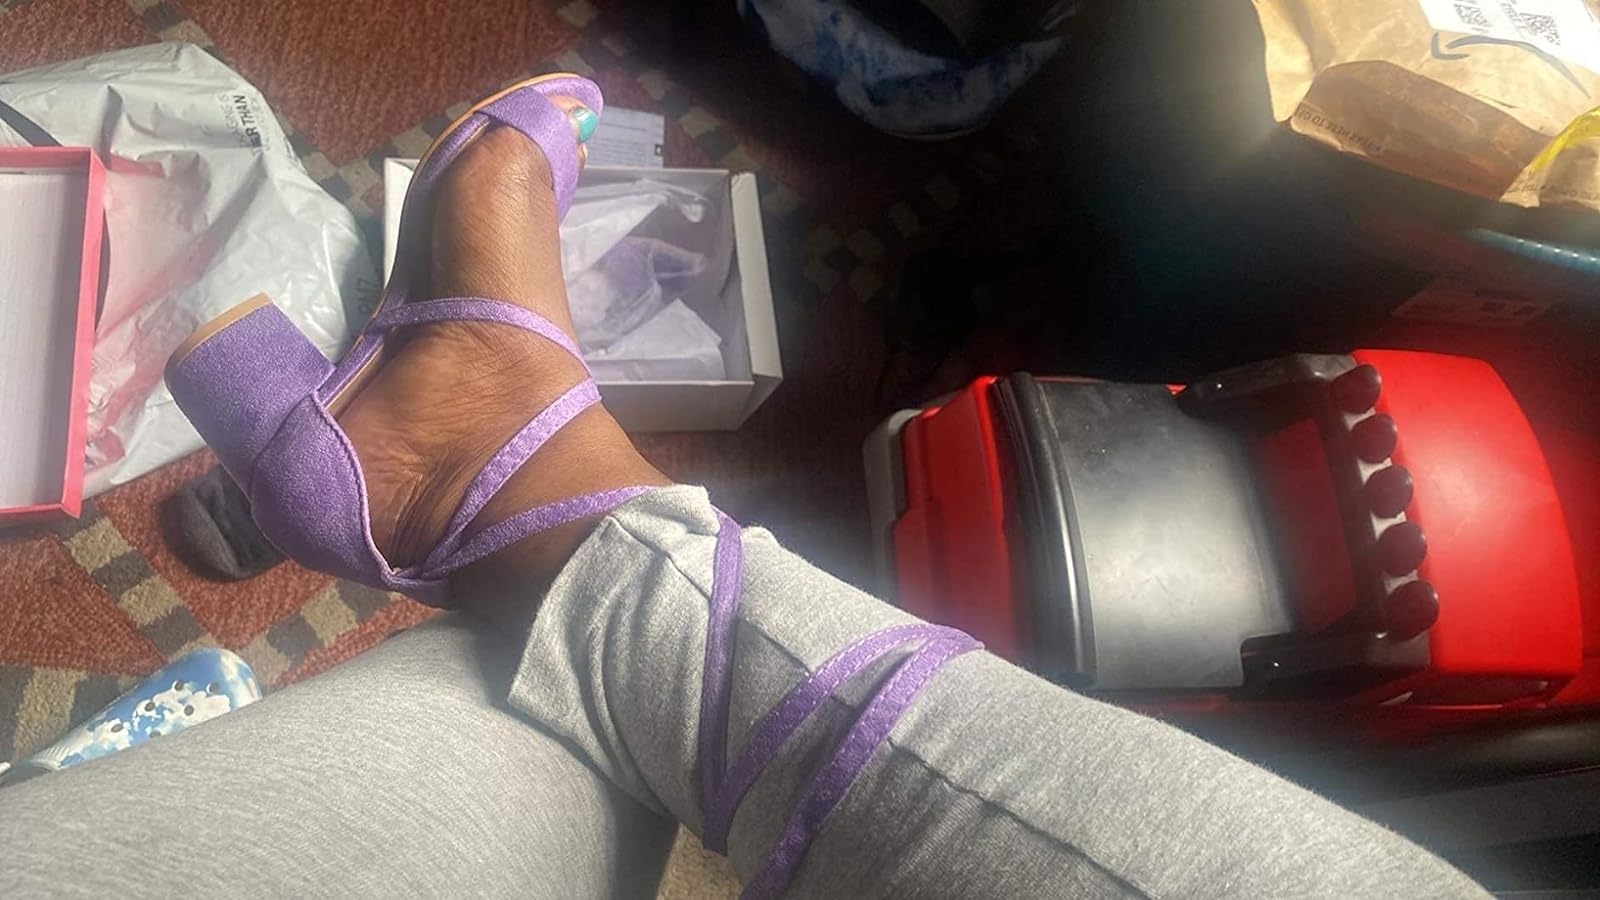 Person wearing purple strap sandals with package materials around, indicating a recent unboxing or purchase